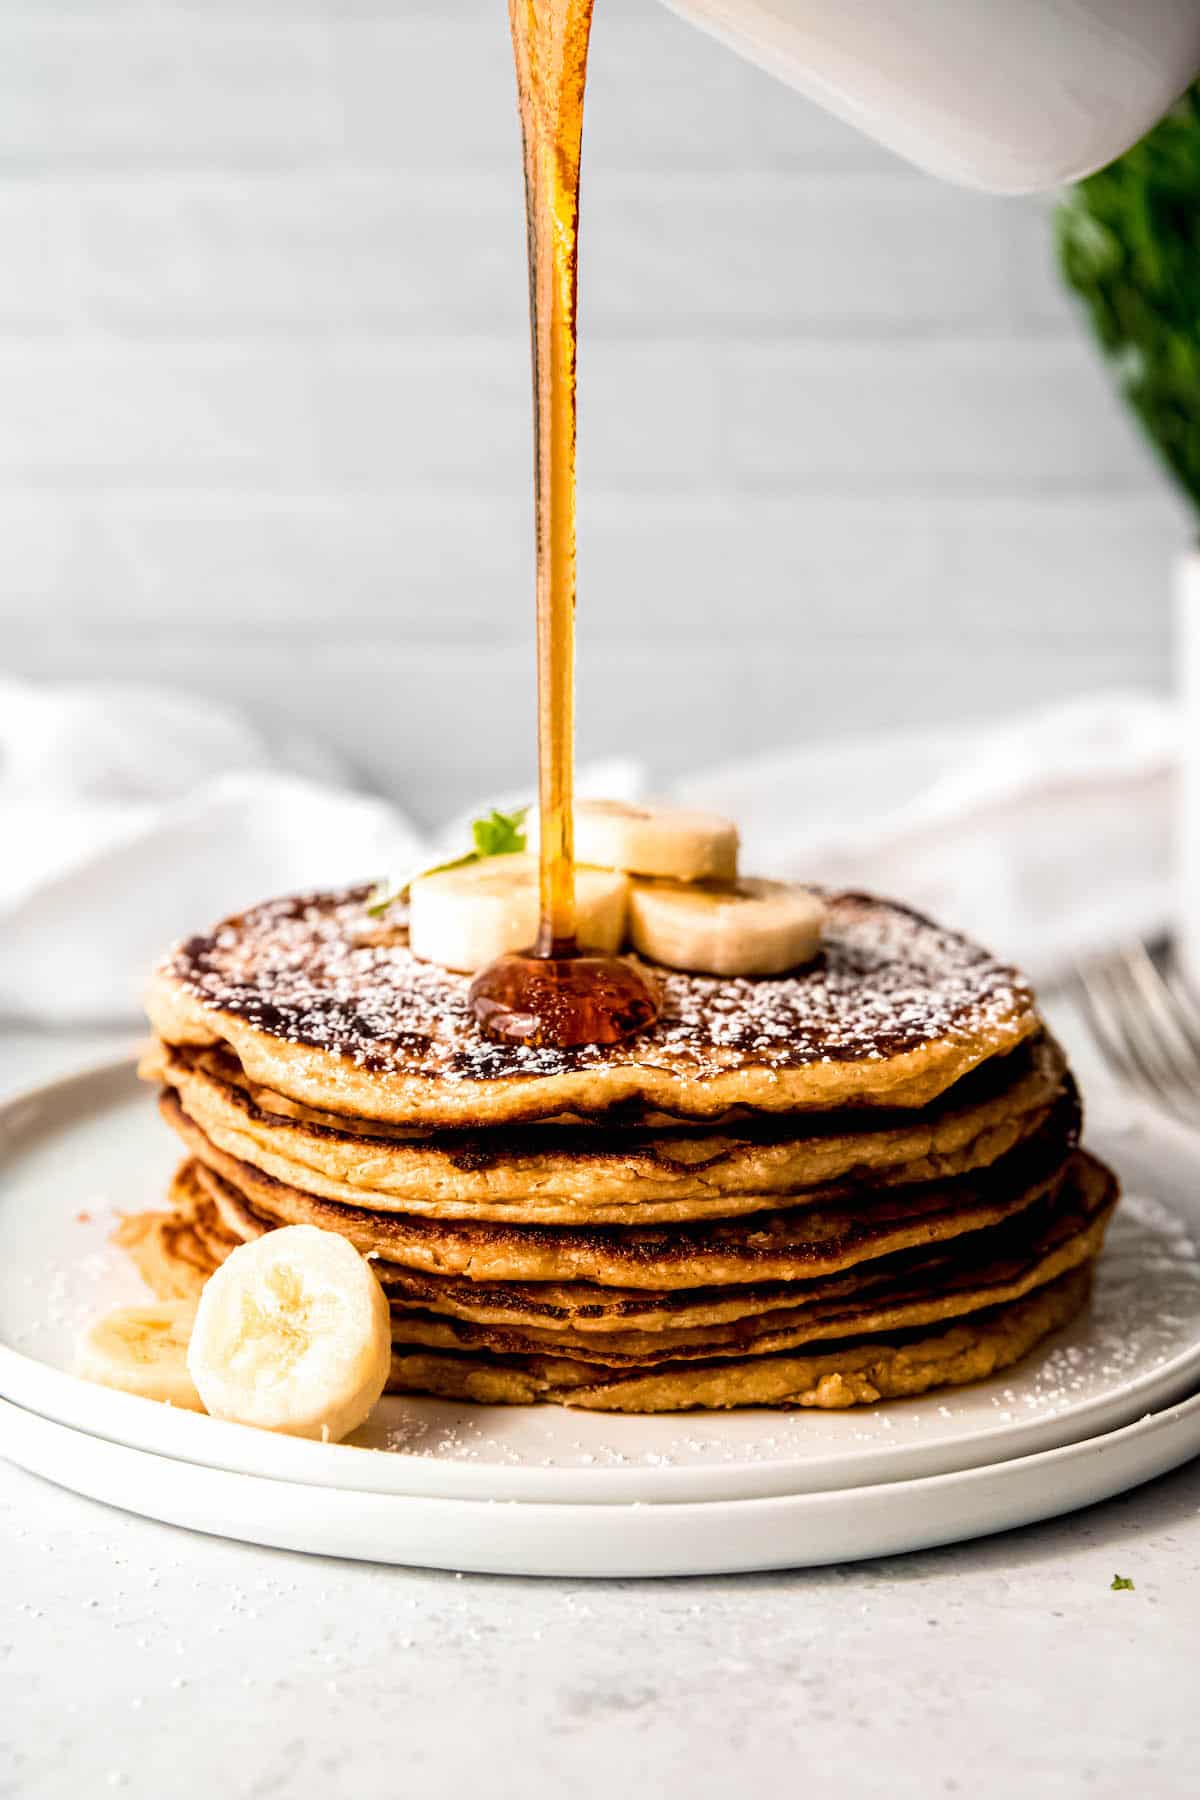 Action shot of maple syrup being poured on a stack of cottage cheese oatmeal banana protein pancakes.